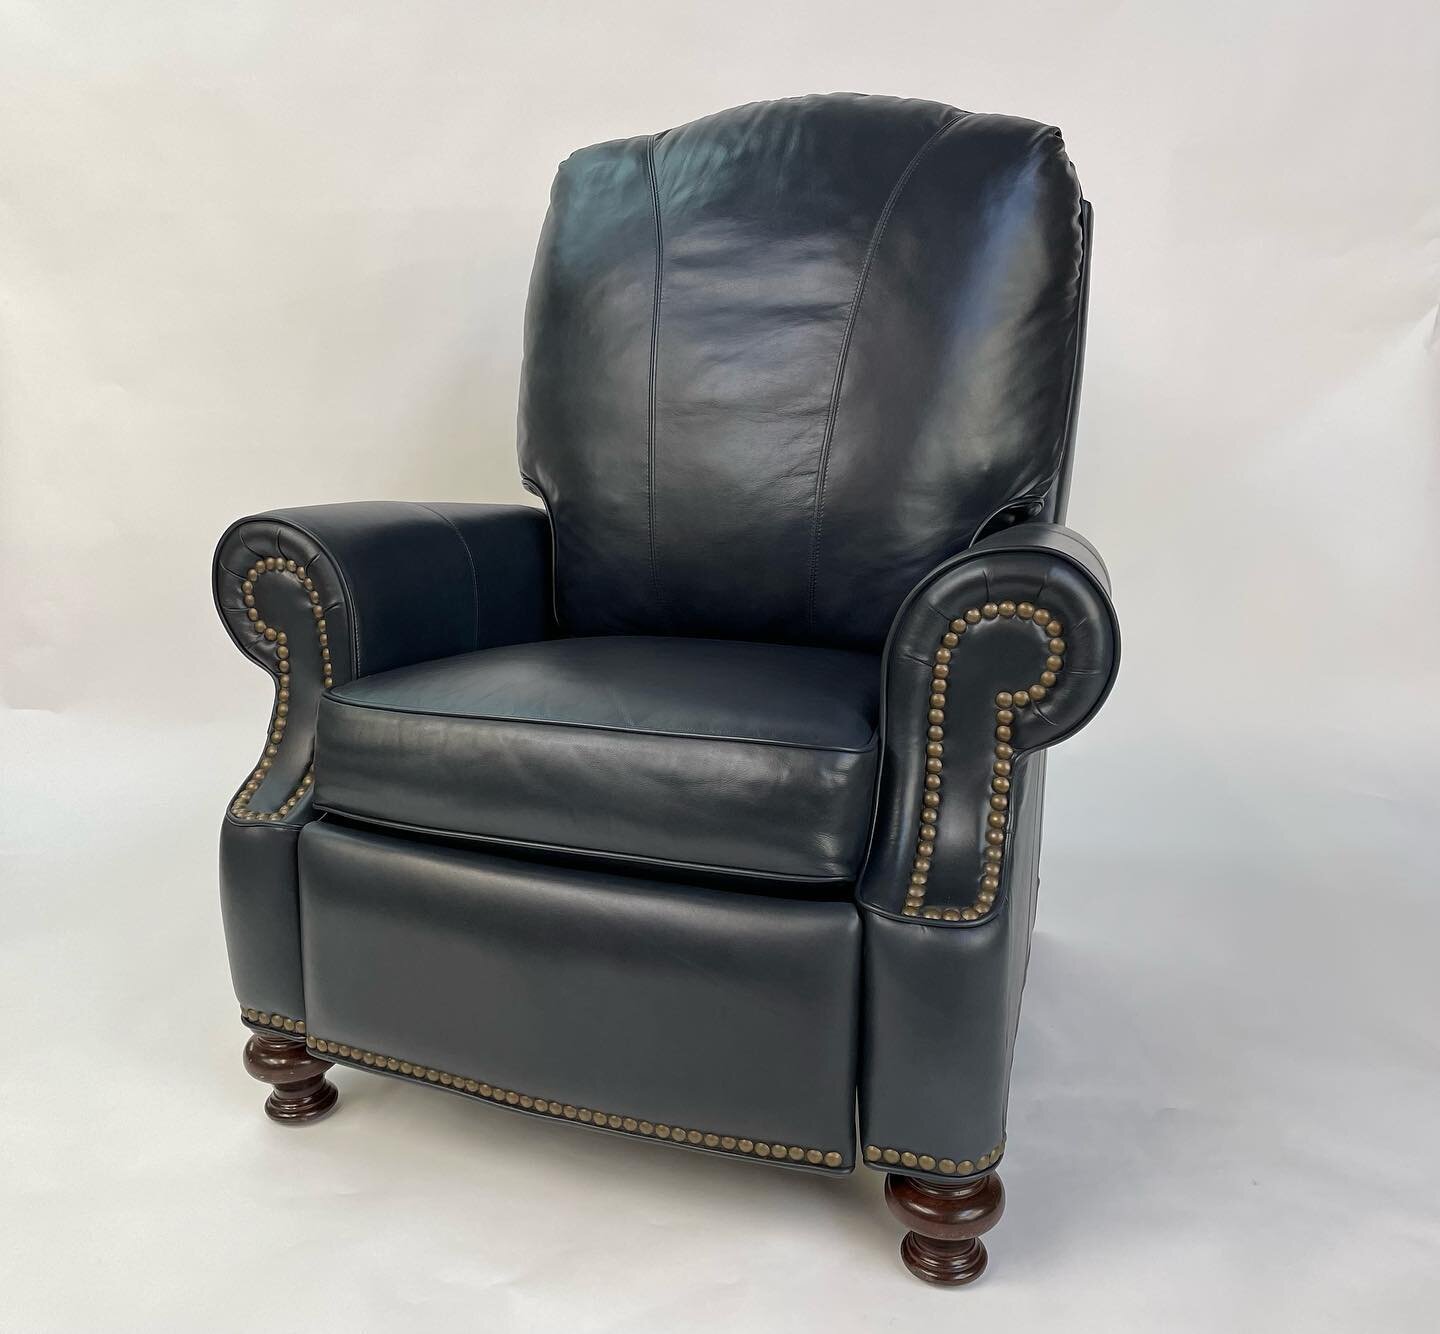 &ldquo;Learn to relax. Your body is precious,as it houses your mind and and spirit.&rdquo;

Motion craft recliner in the shop for color restoration, new support &amp; mechanism adjustment. Good as new!

#sherrillfurniture #leatherrecliner #recliner #